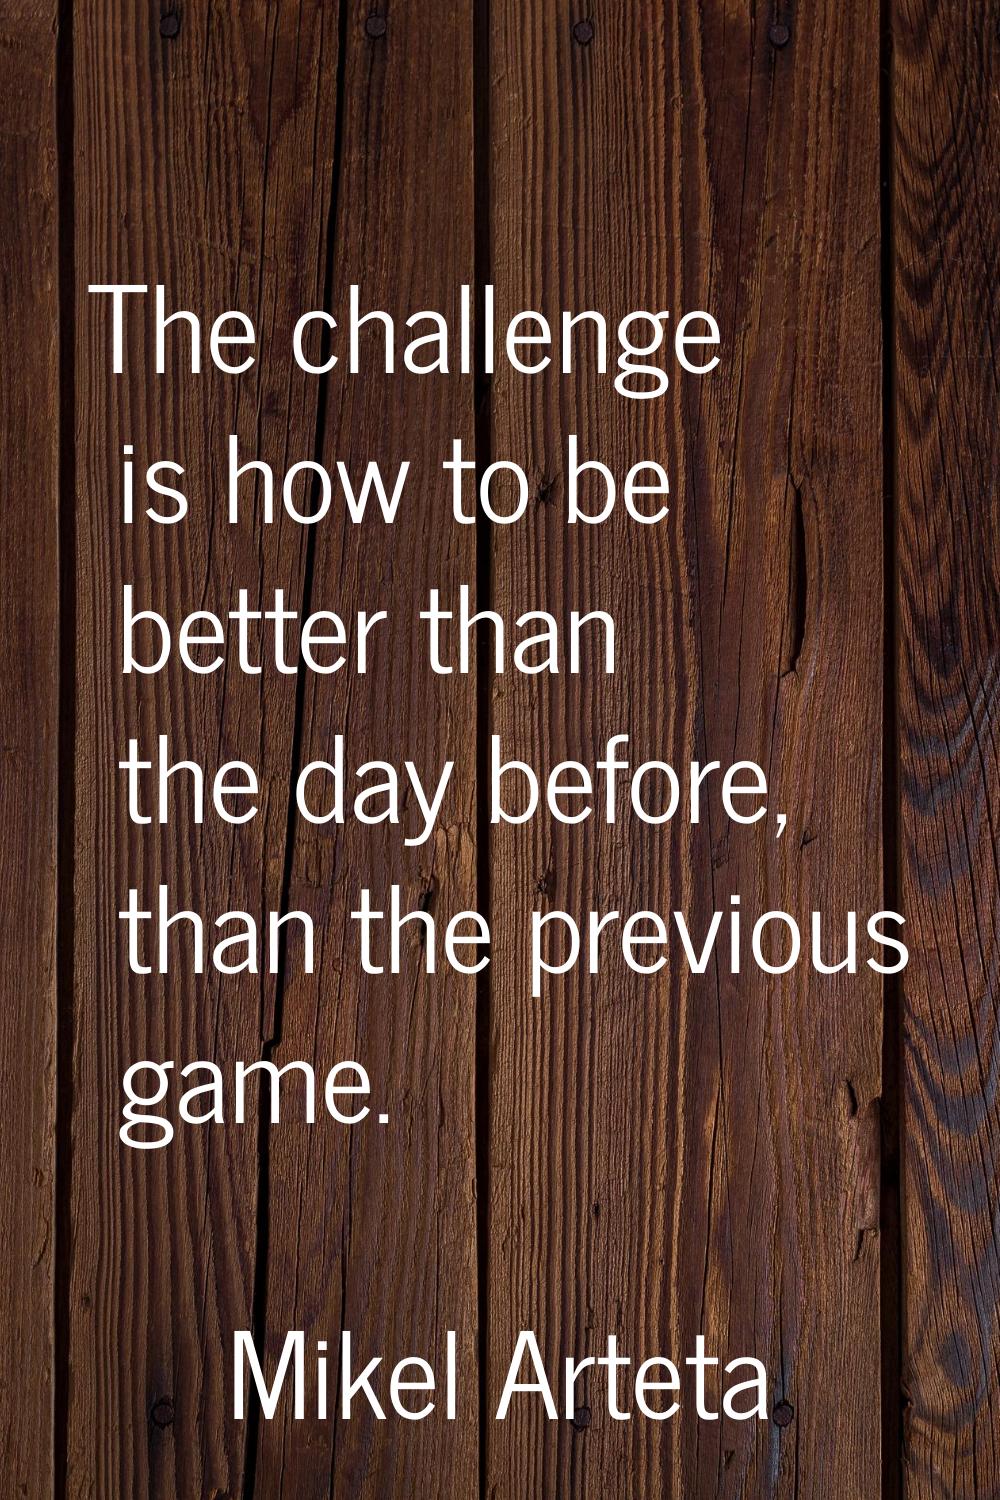 The challenge is how to be better than the day before, than the previous game.